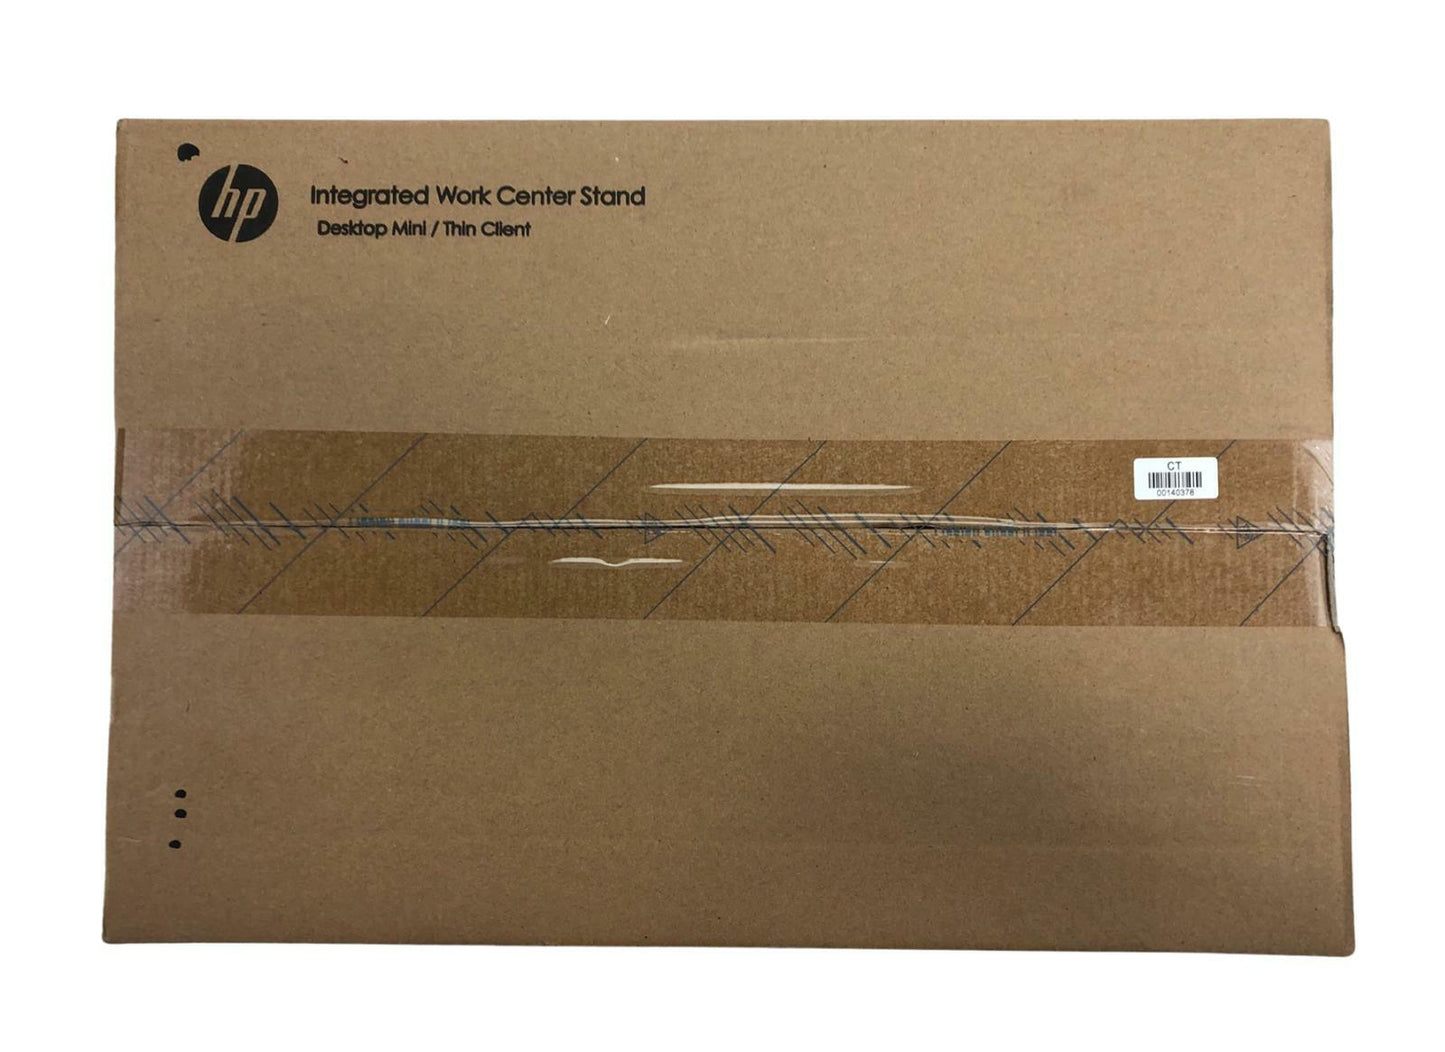 NEW - HP IWC Integrated Work Center Stand - Desktop Mini / Thin Client - G1V61AT